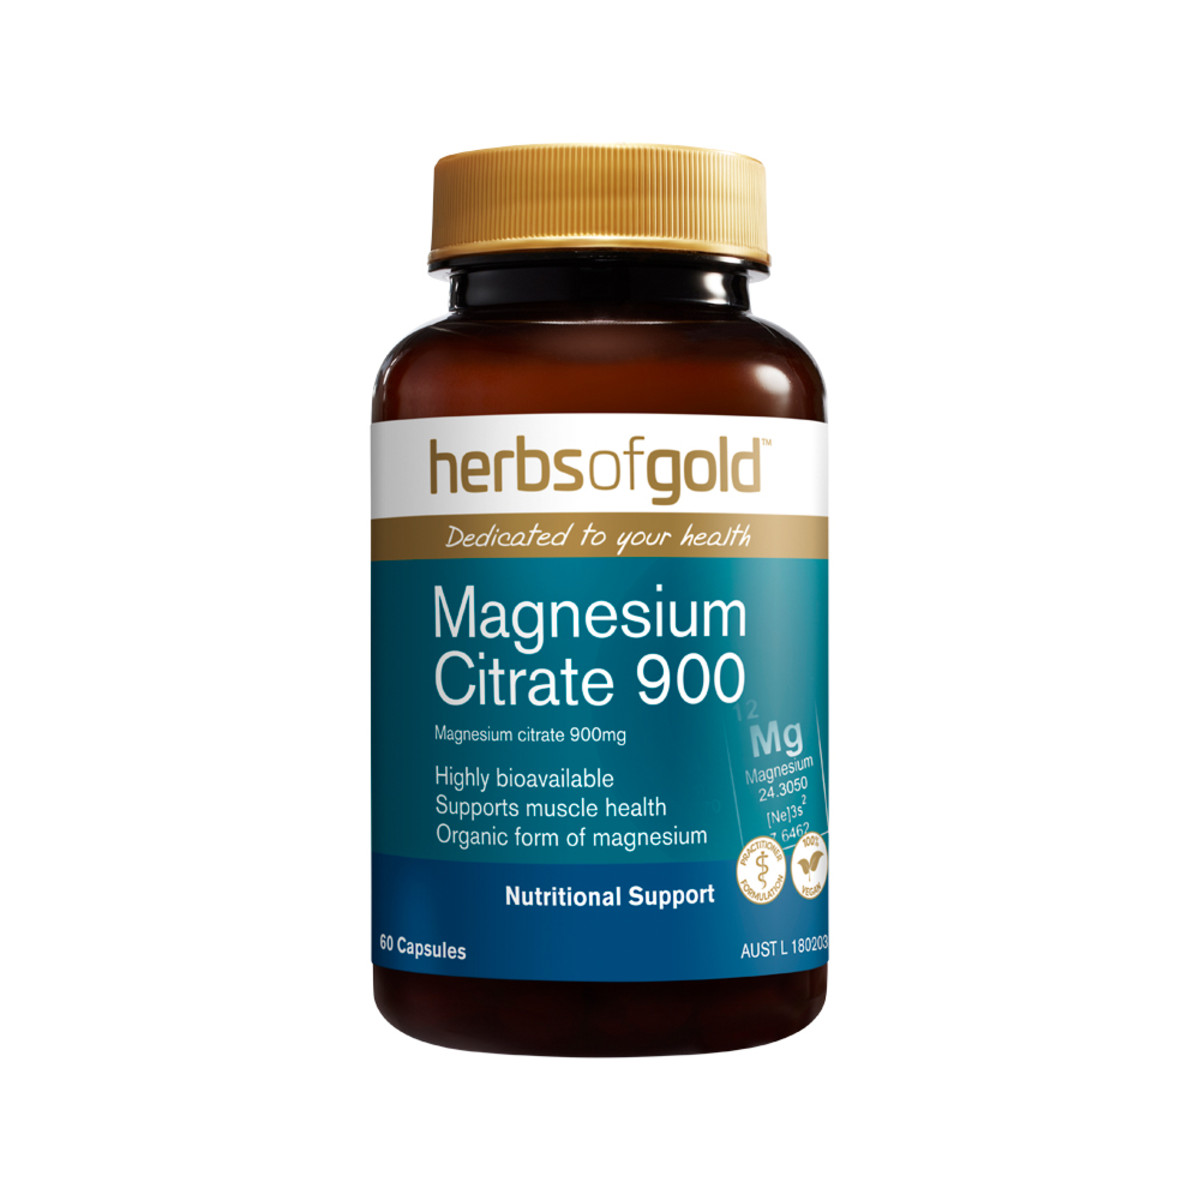 HERBS OF GOLD - Magnesium Citrate 900